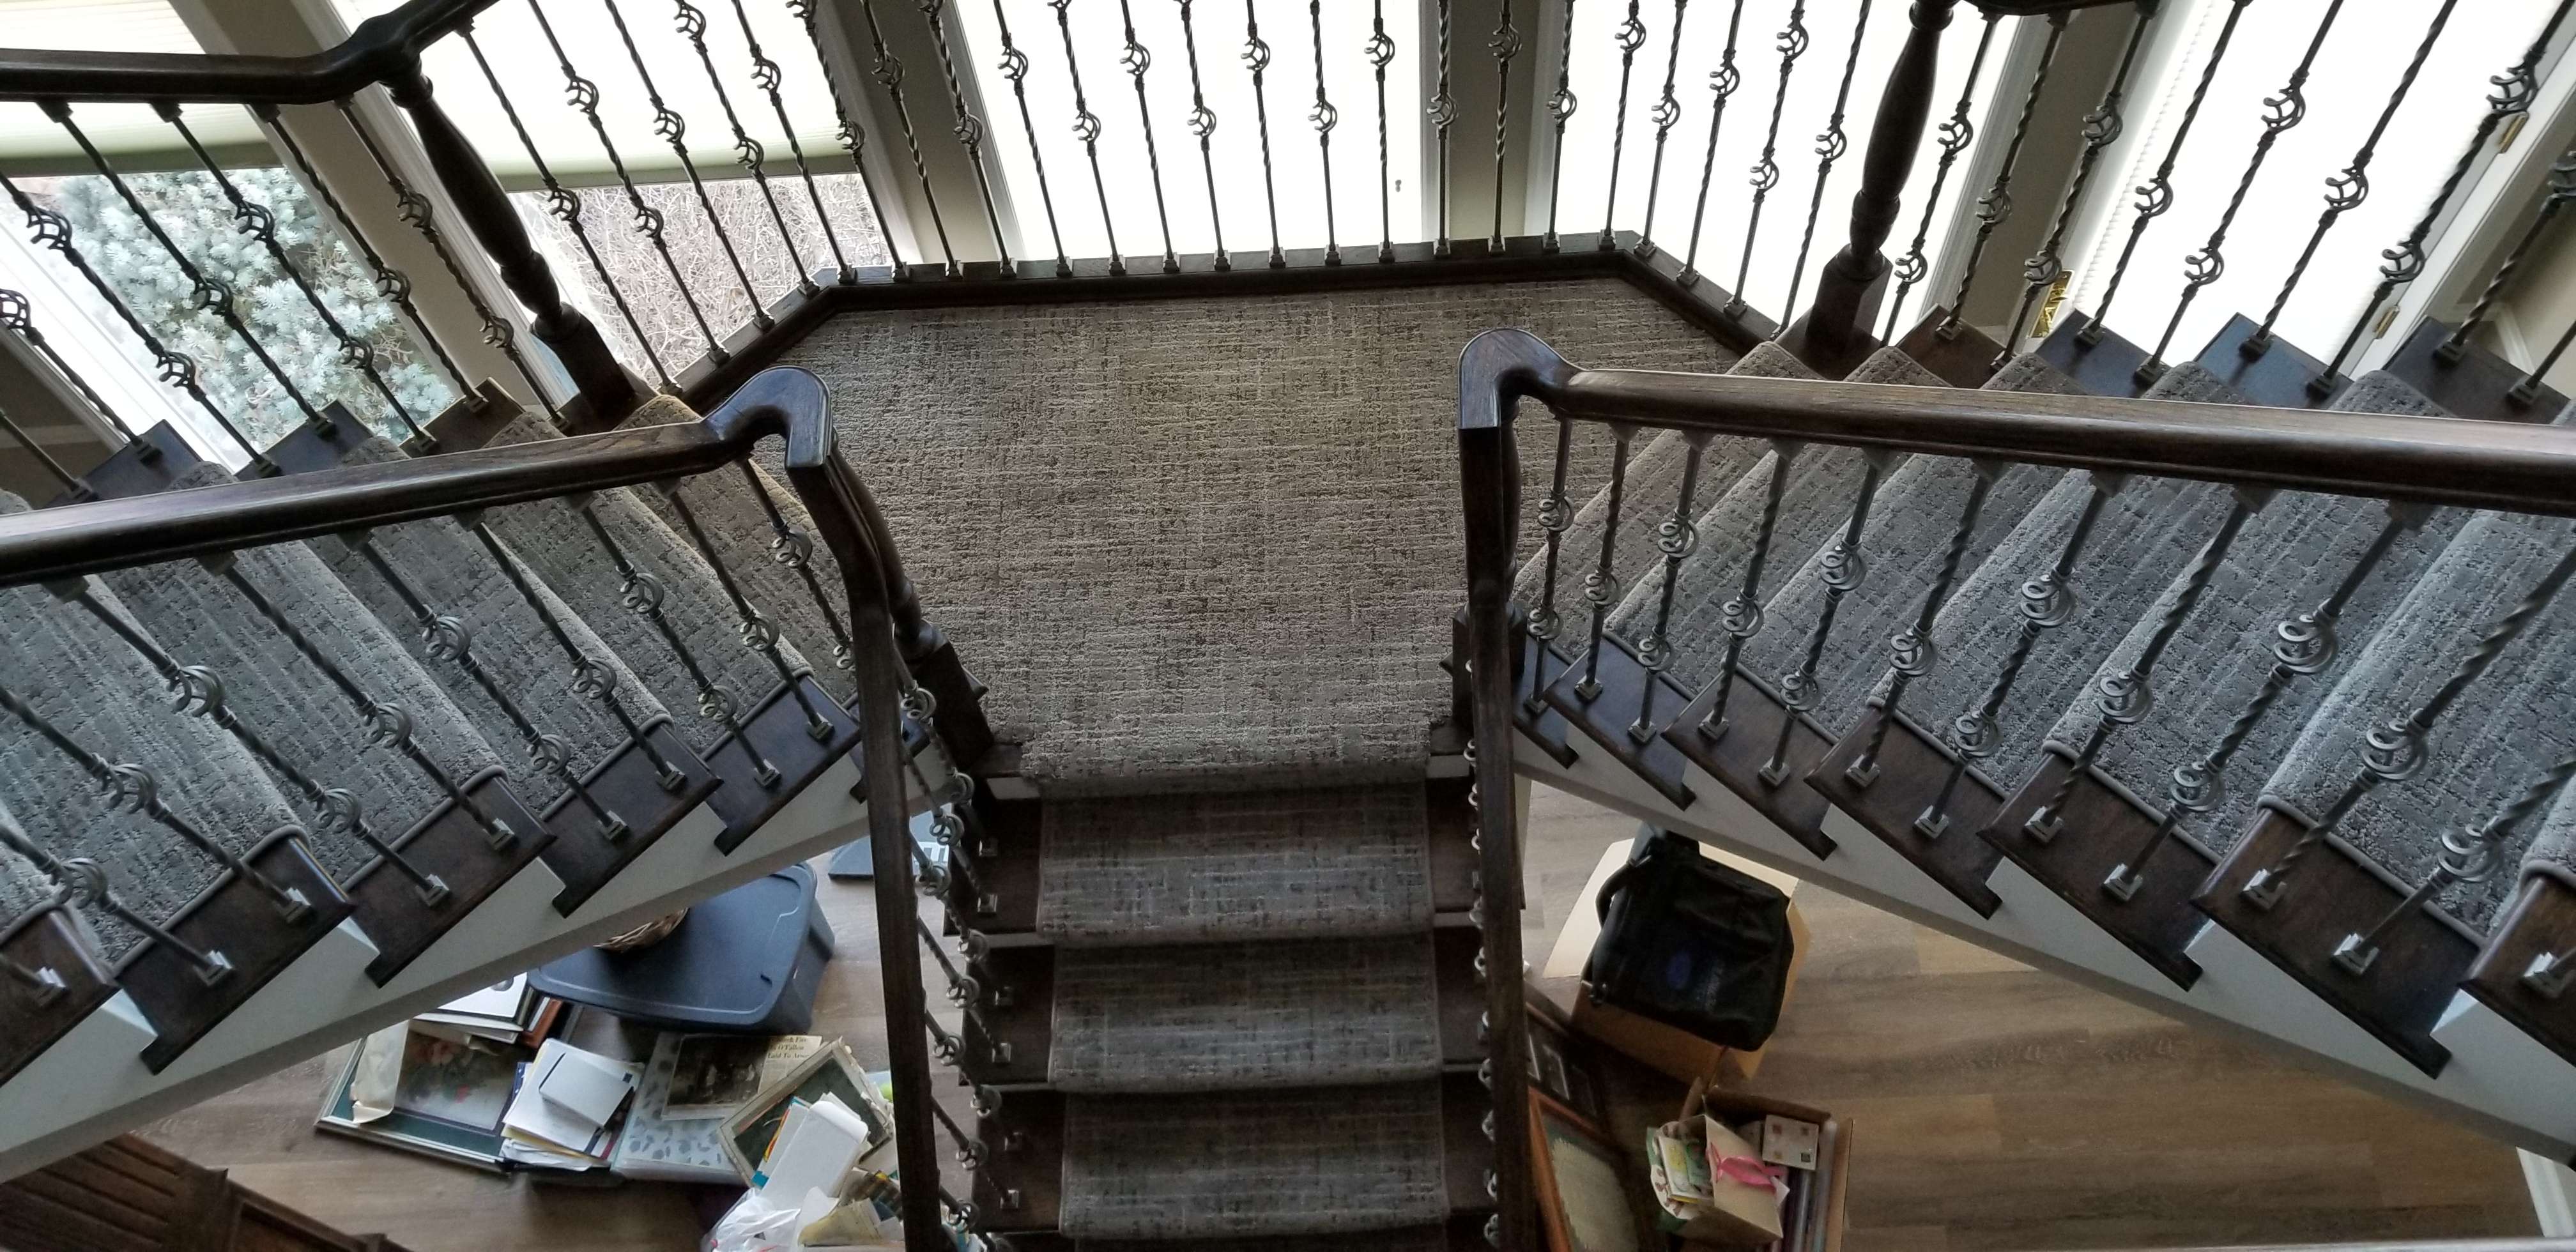 A view of the top of stairs from above.